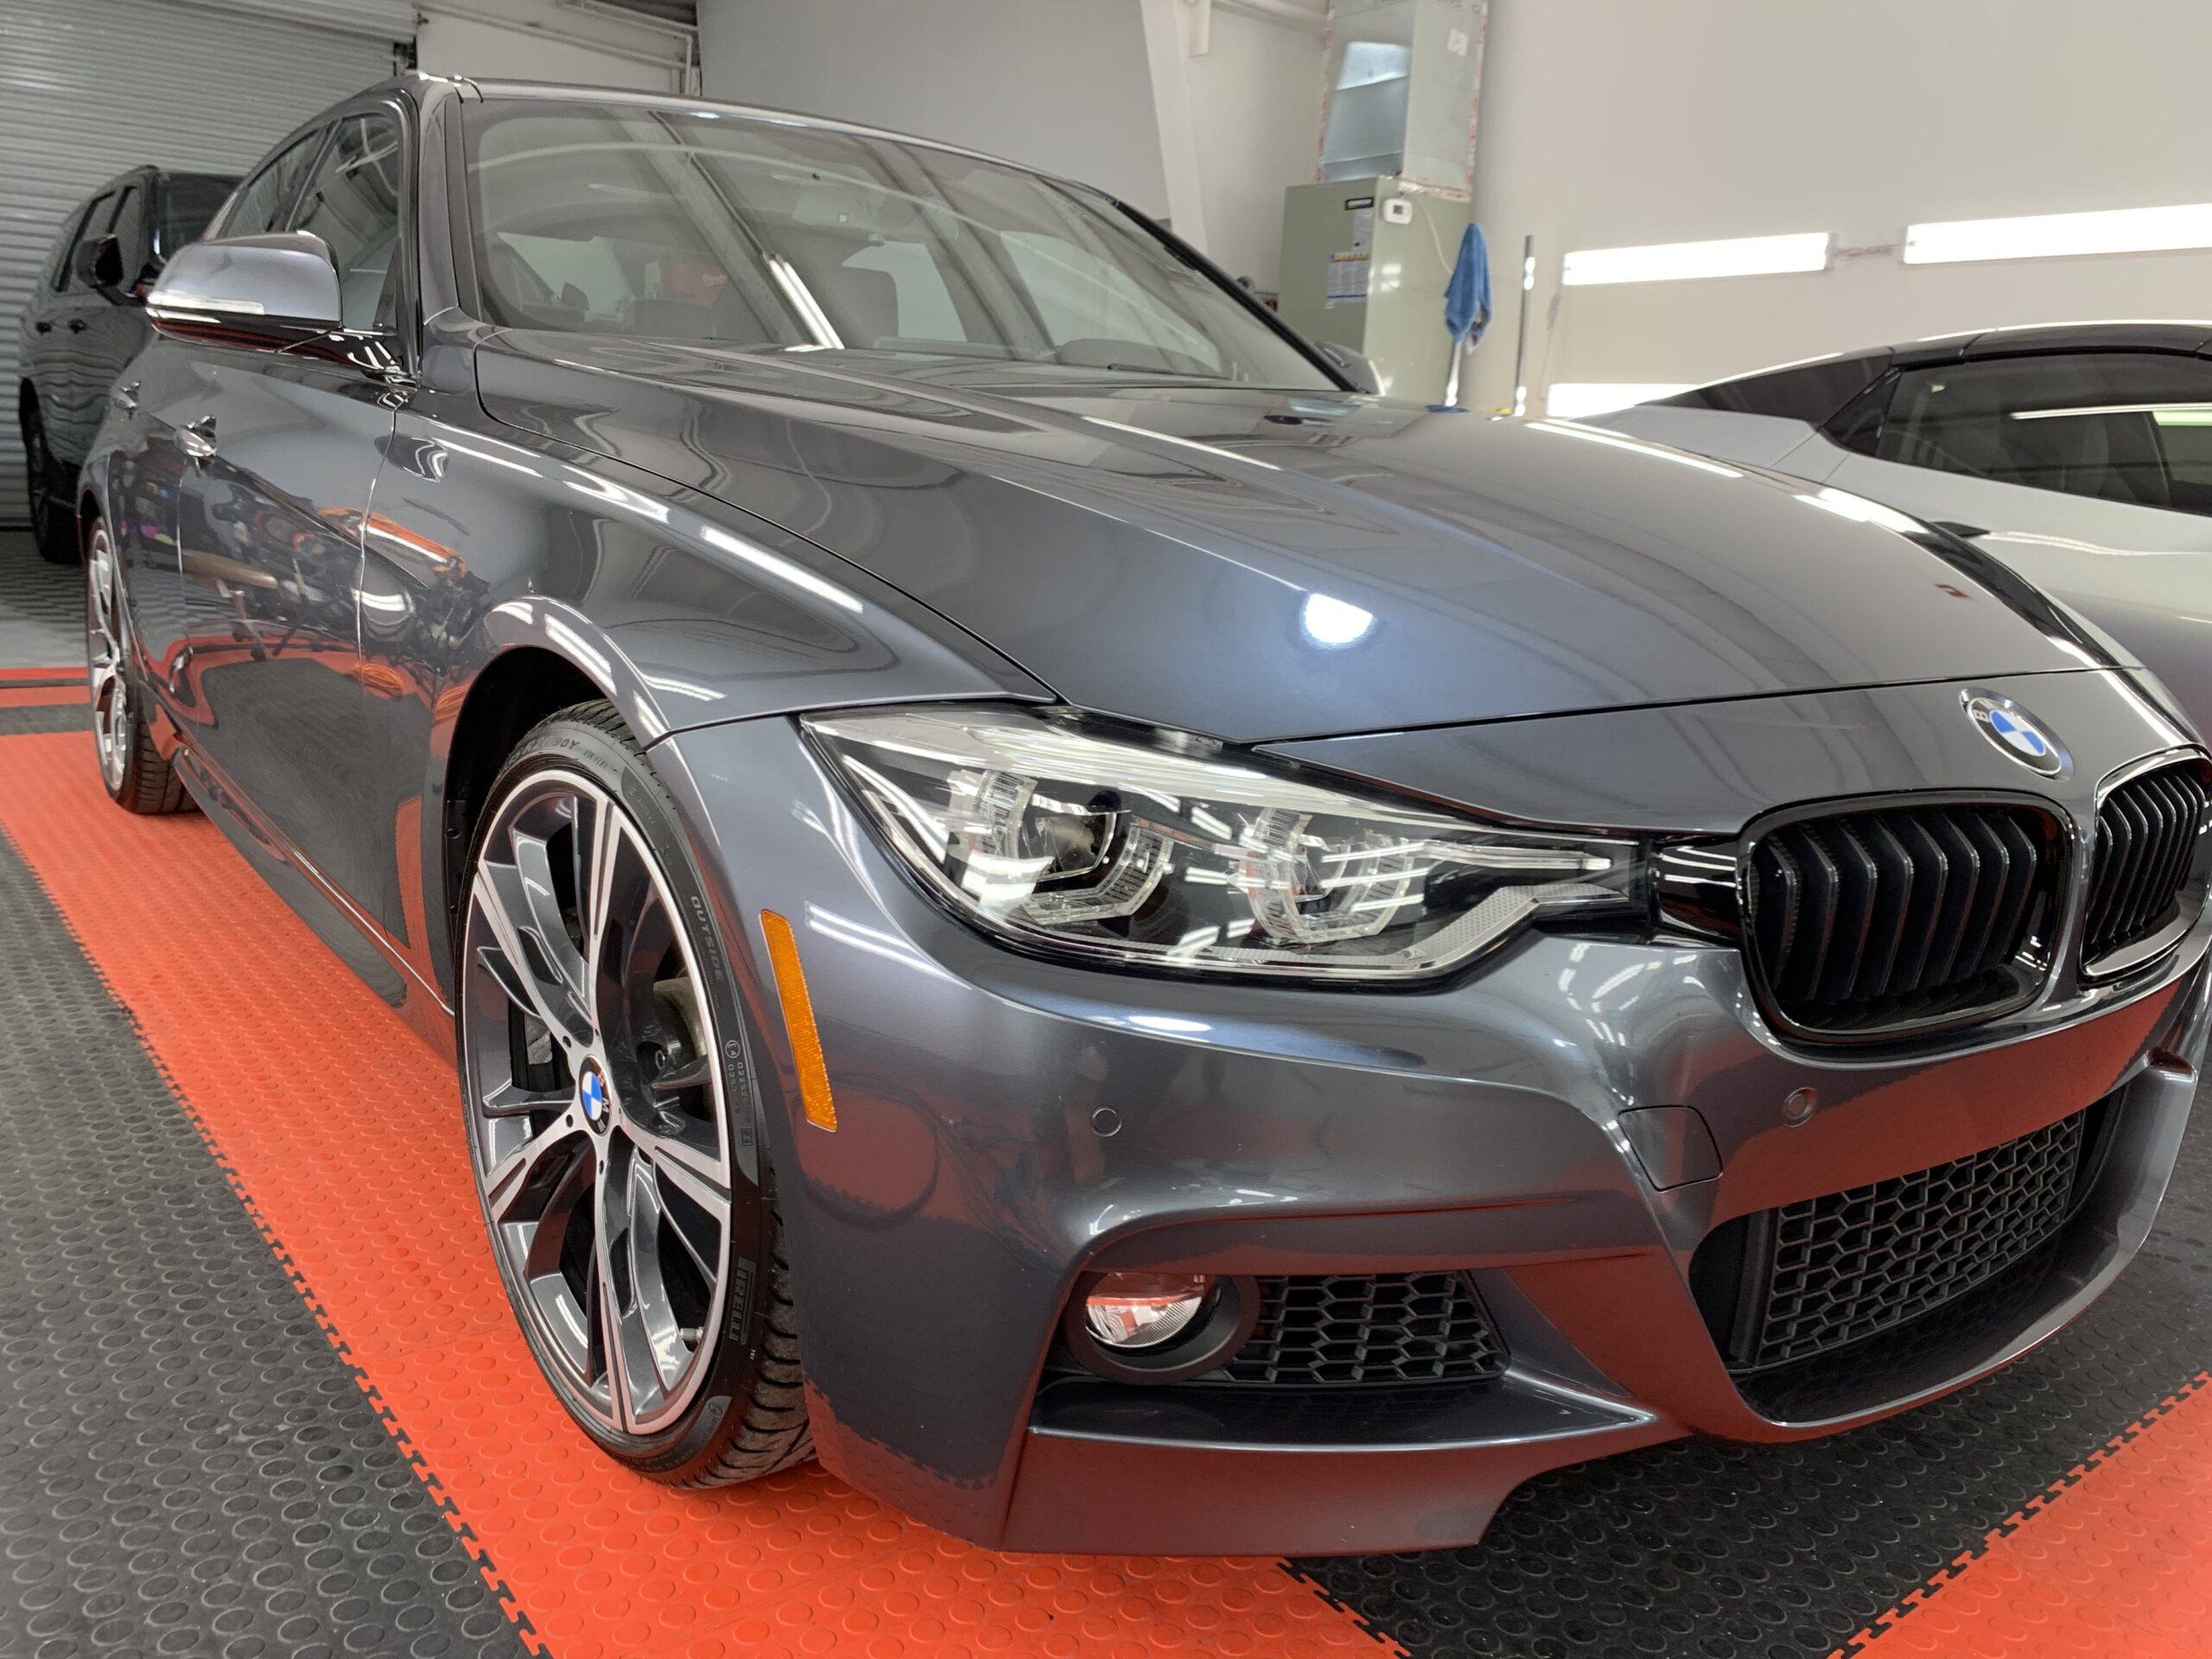 Photo of a Ceramic Coating of a 2021 BMW 3-Series